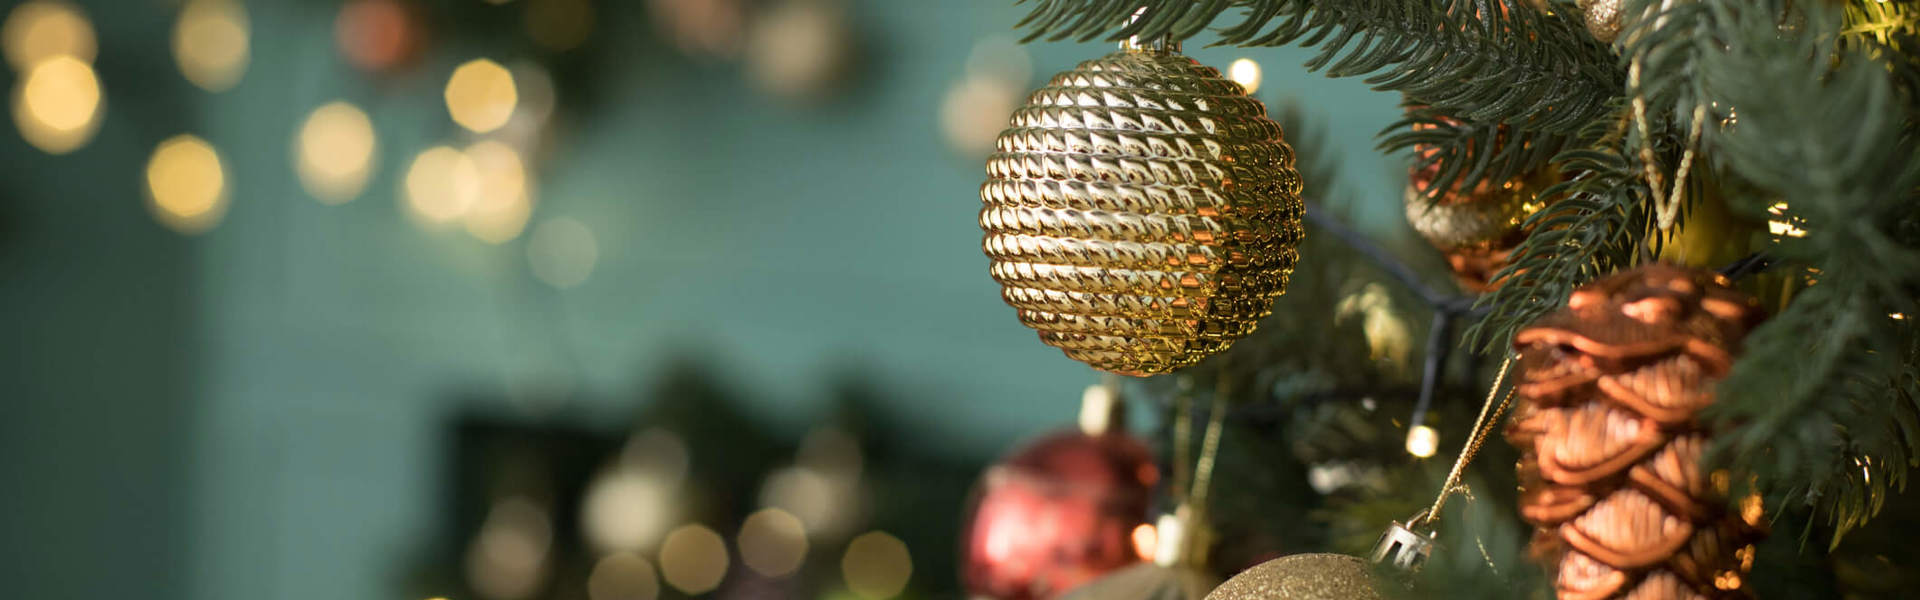 a close up of Christmas tree ornaments hanging on a tree